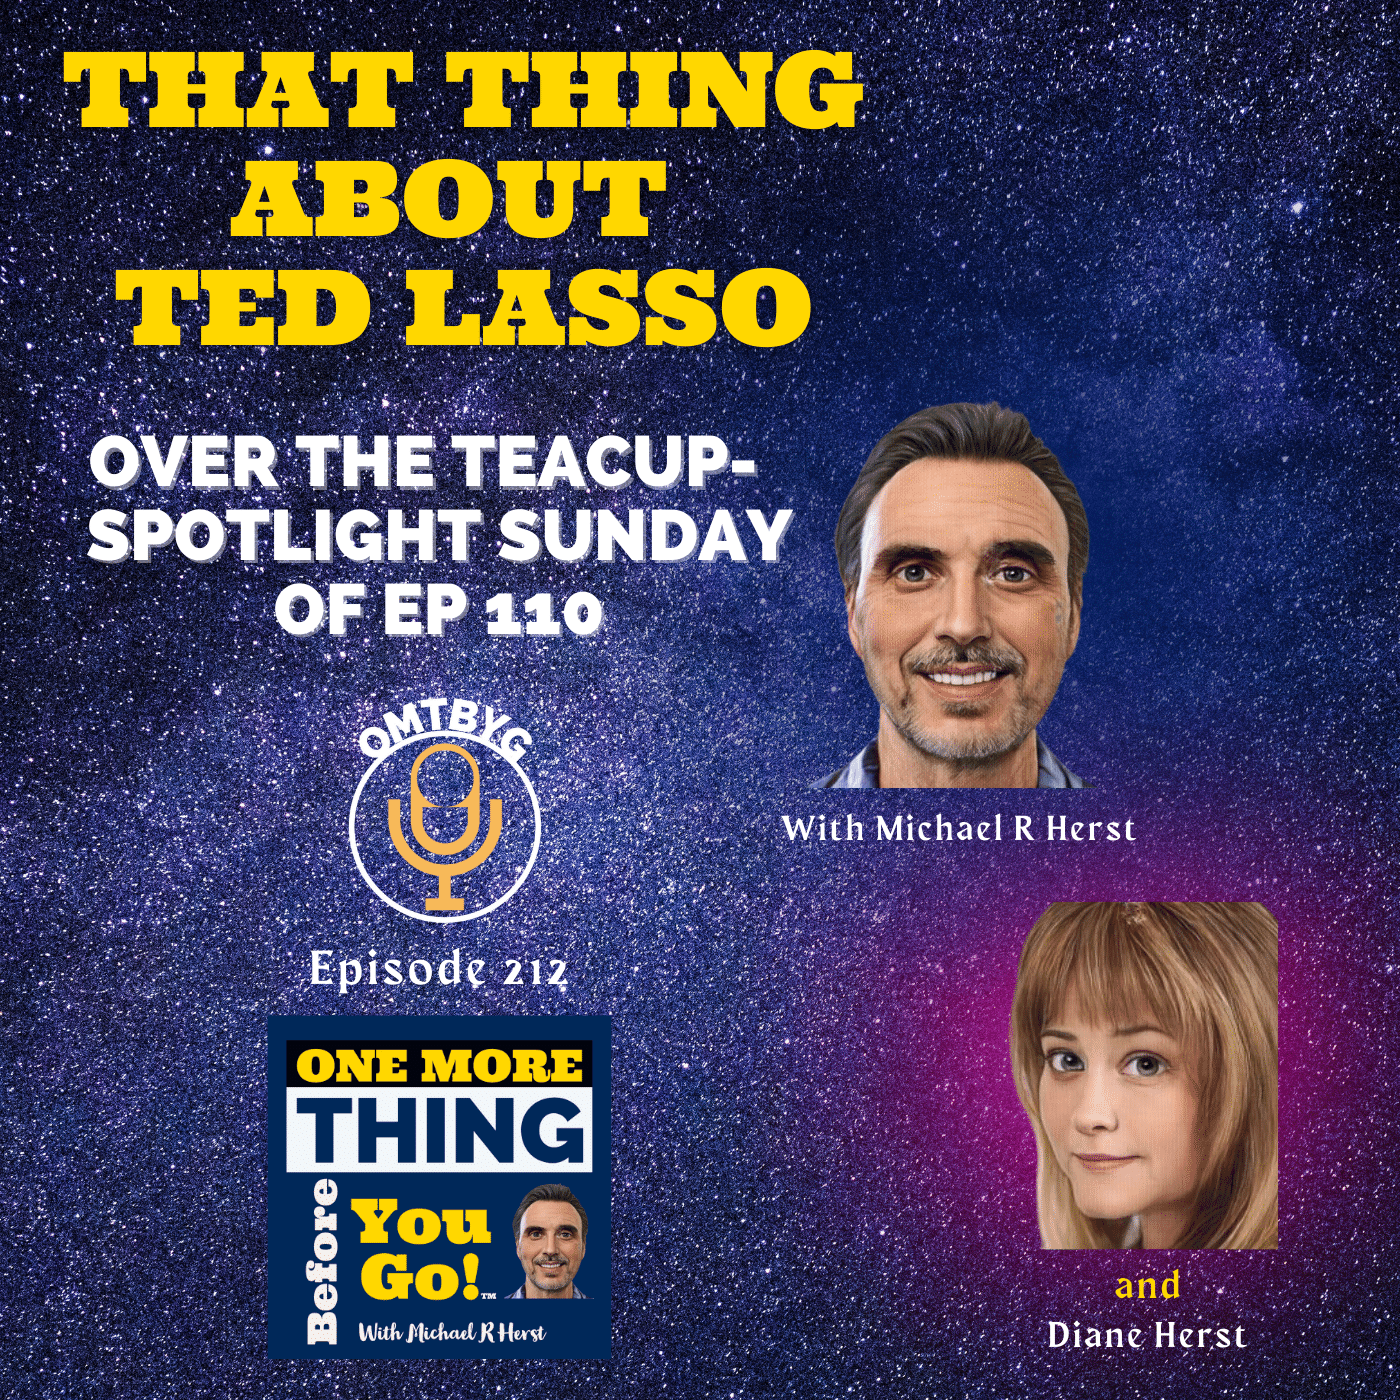 Over the Teacup Spotlight Sunday- That Thing About Ted Lasso Image